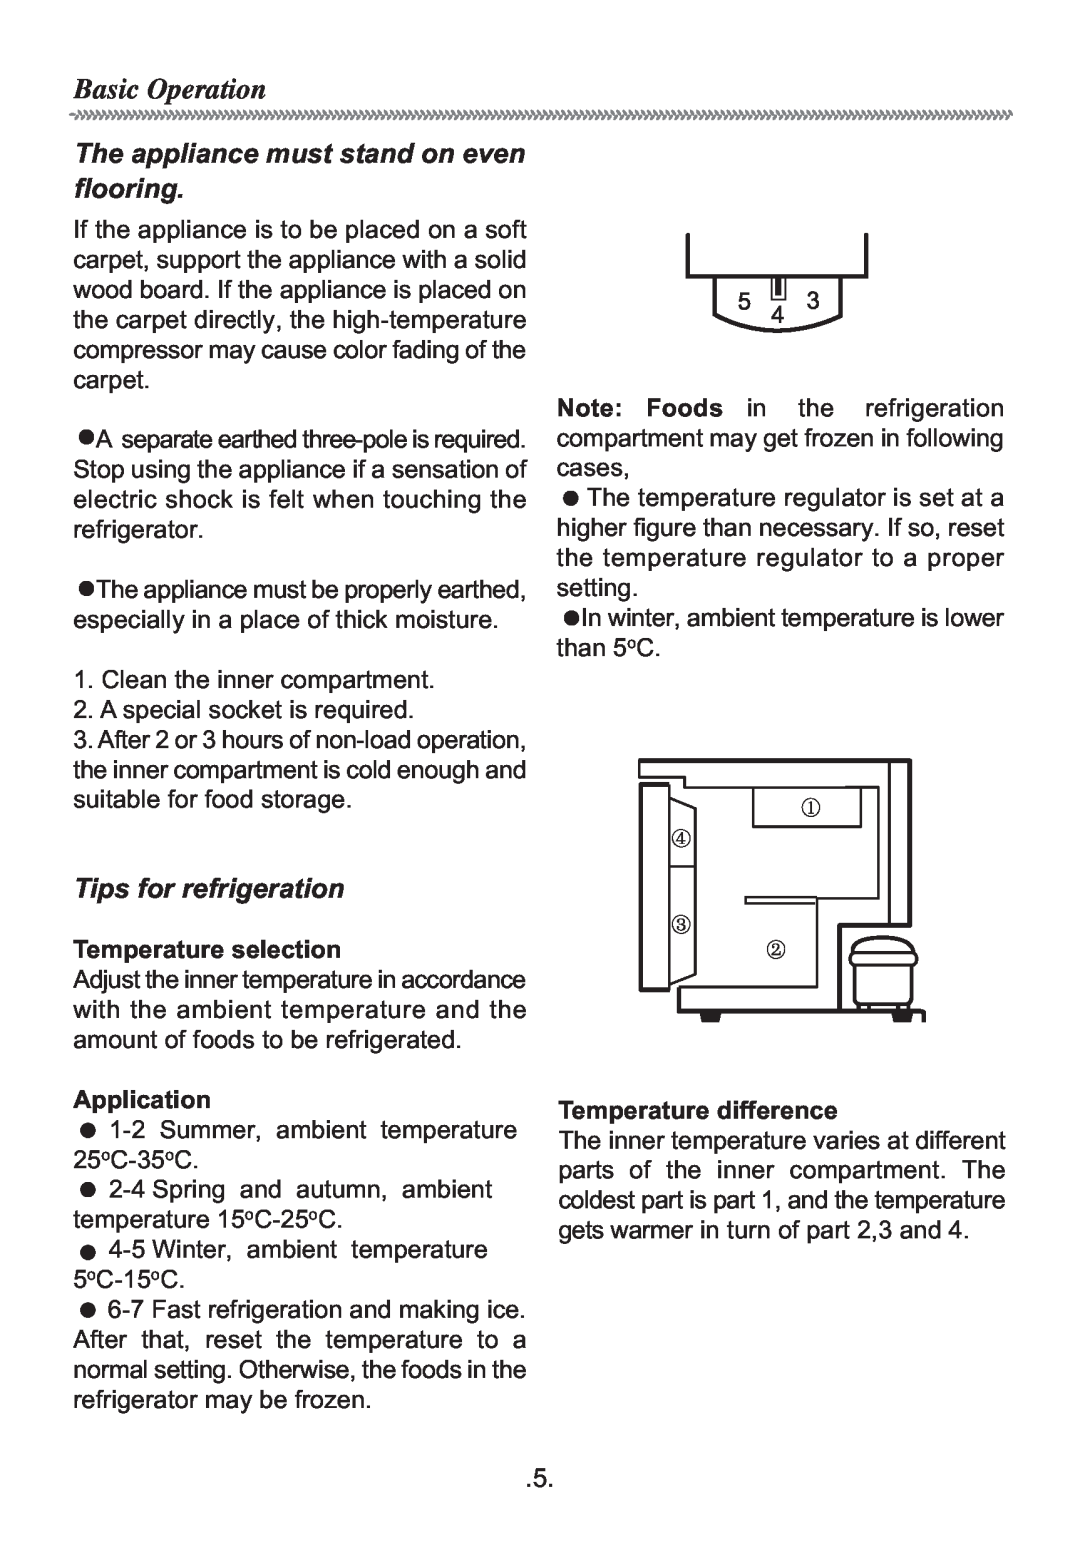 Haier HR-66 Basic Operation, The appliance must stand on even flooring, Tips for refrigeration, Temperature selection 